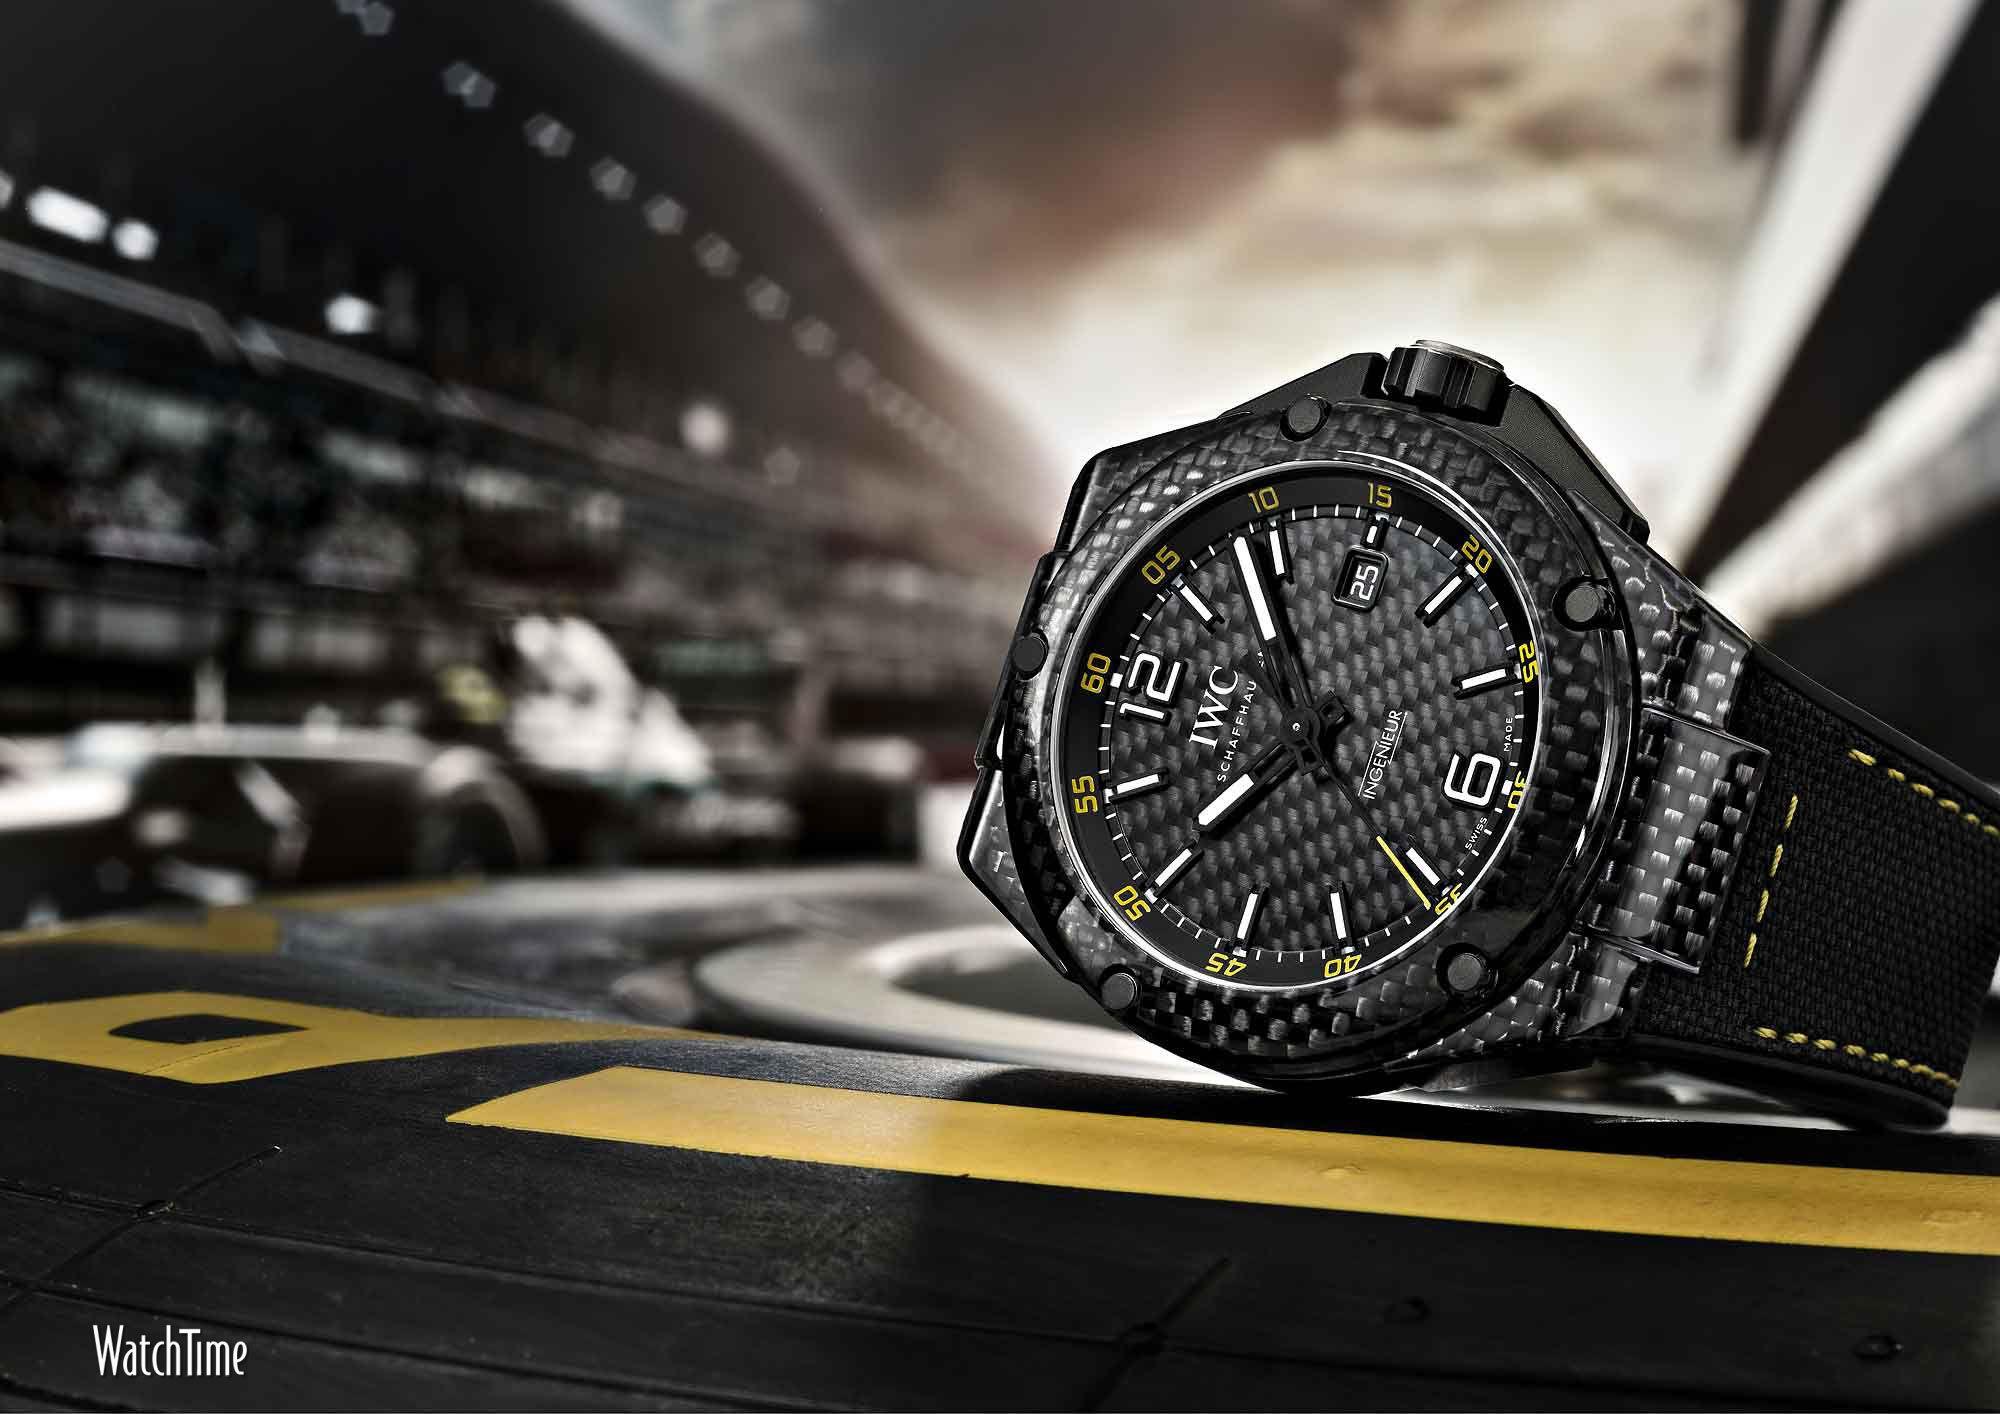 Seven Iwc Ingenieur Watches › Watchtime - Ingenieur Automatic Carbon Performance Ceramic , HD Wallpaper & Backgrounds